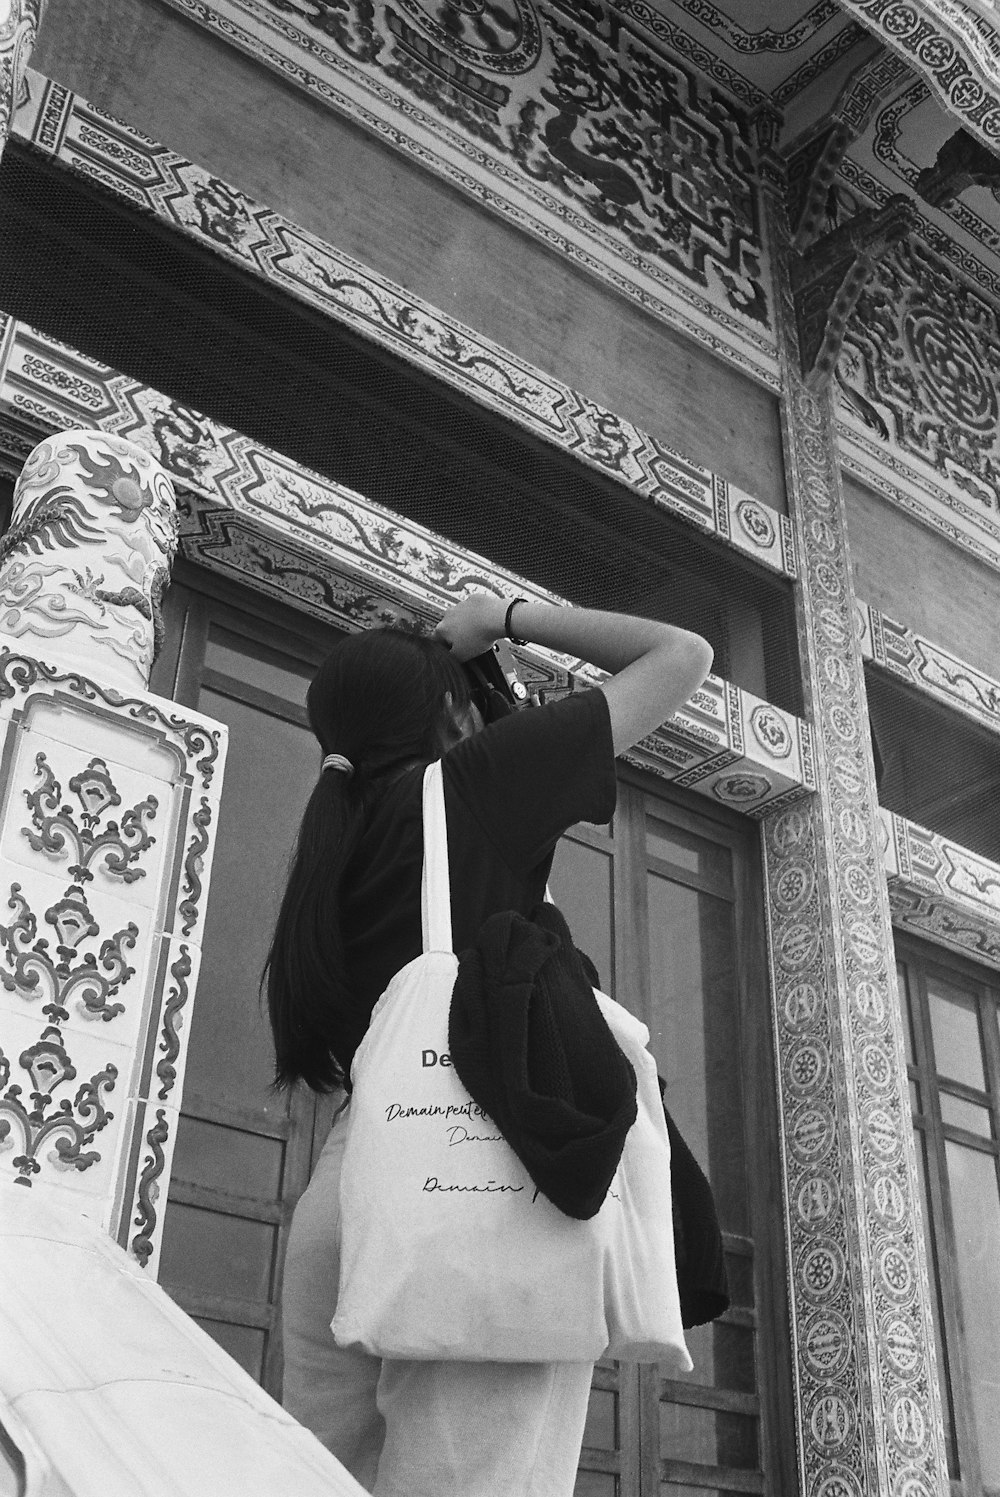 a black and white photo of a woman carrying a bag